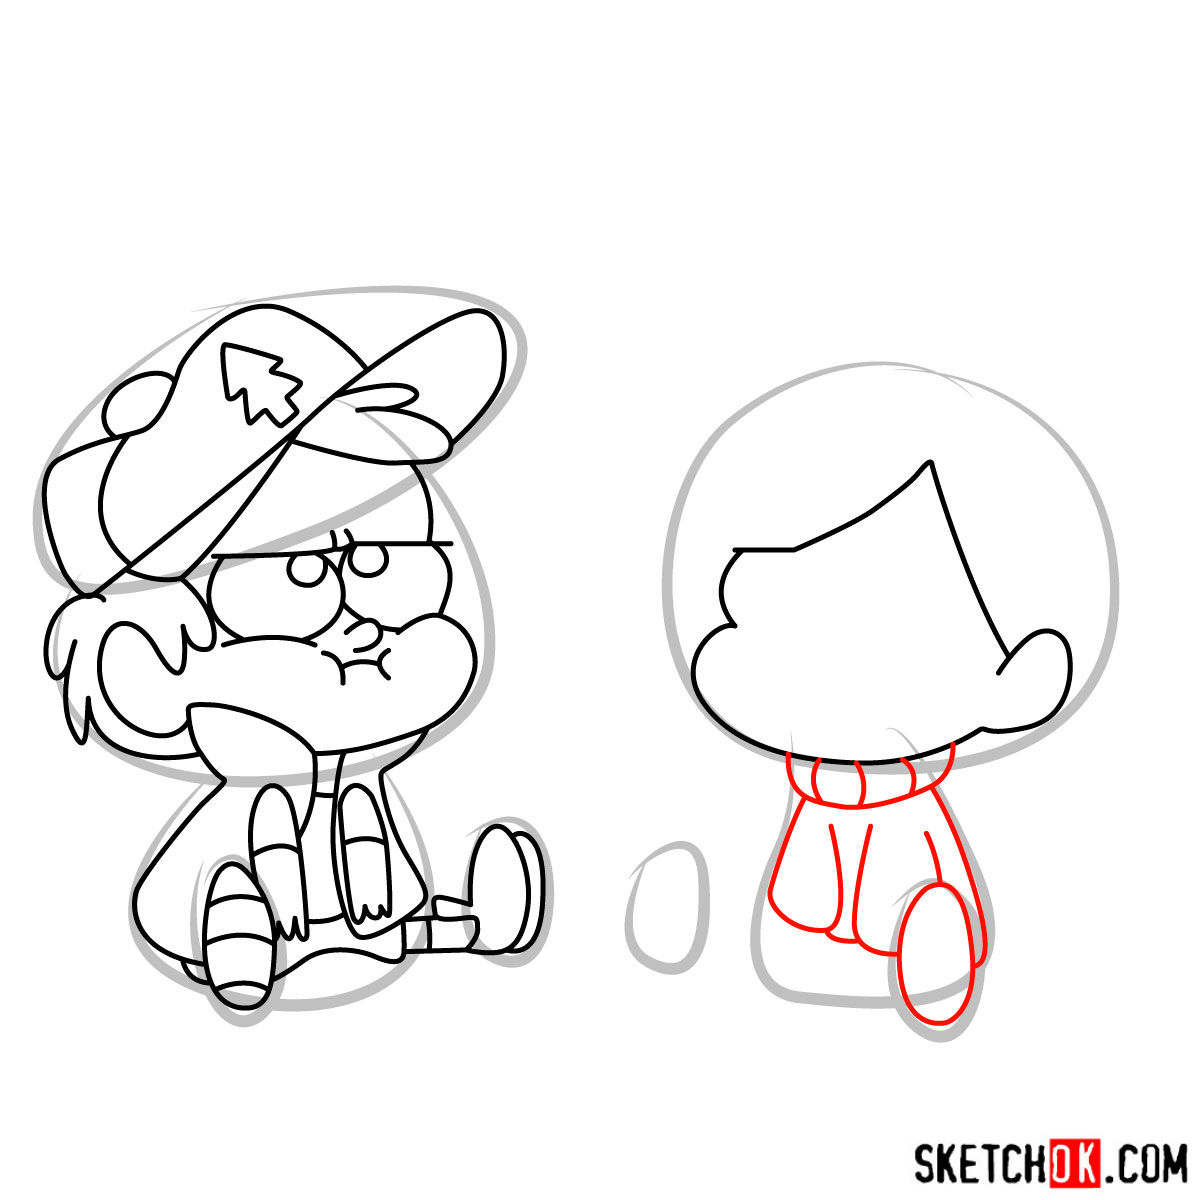 How to draw Dipper and Mabel Pines chibi style - step 10